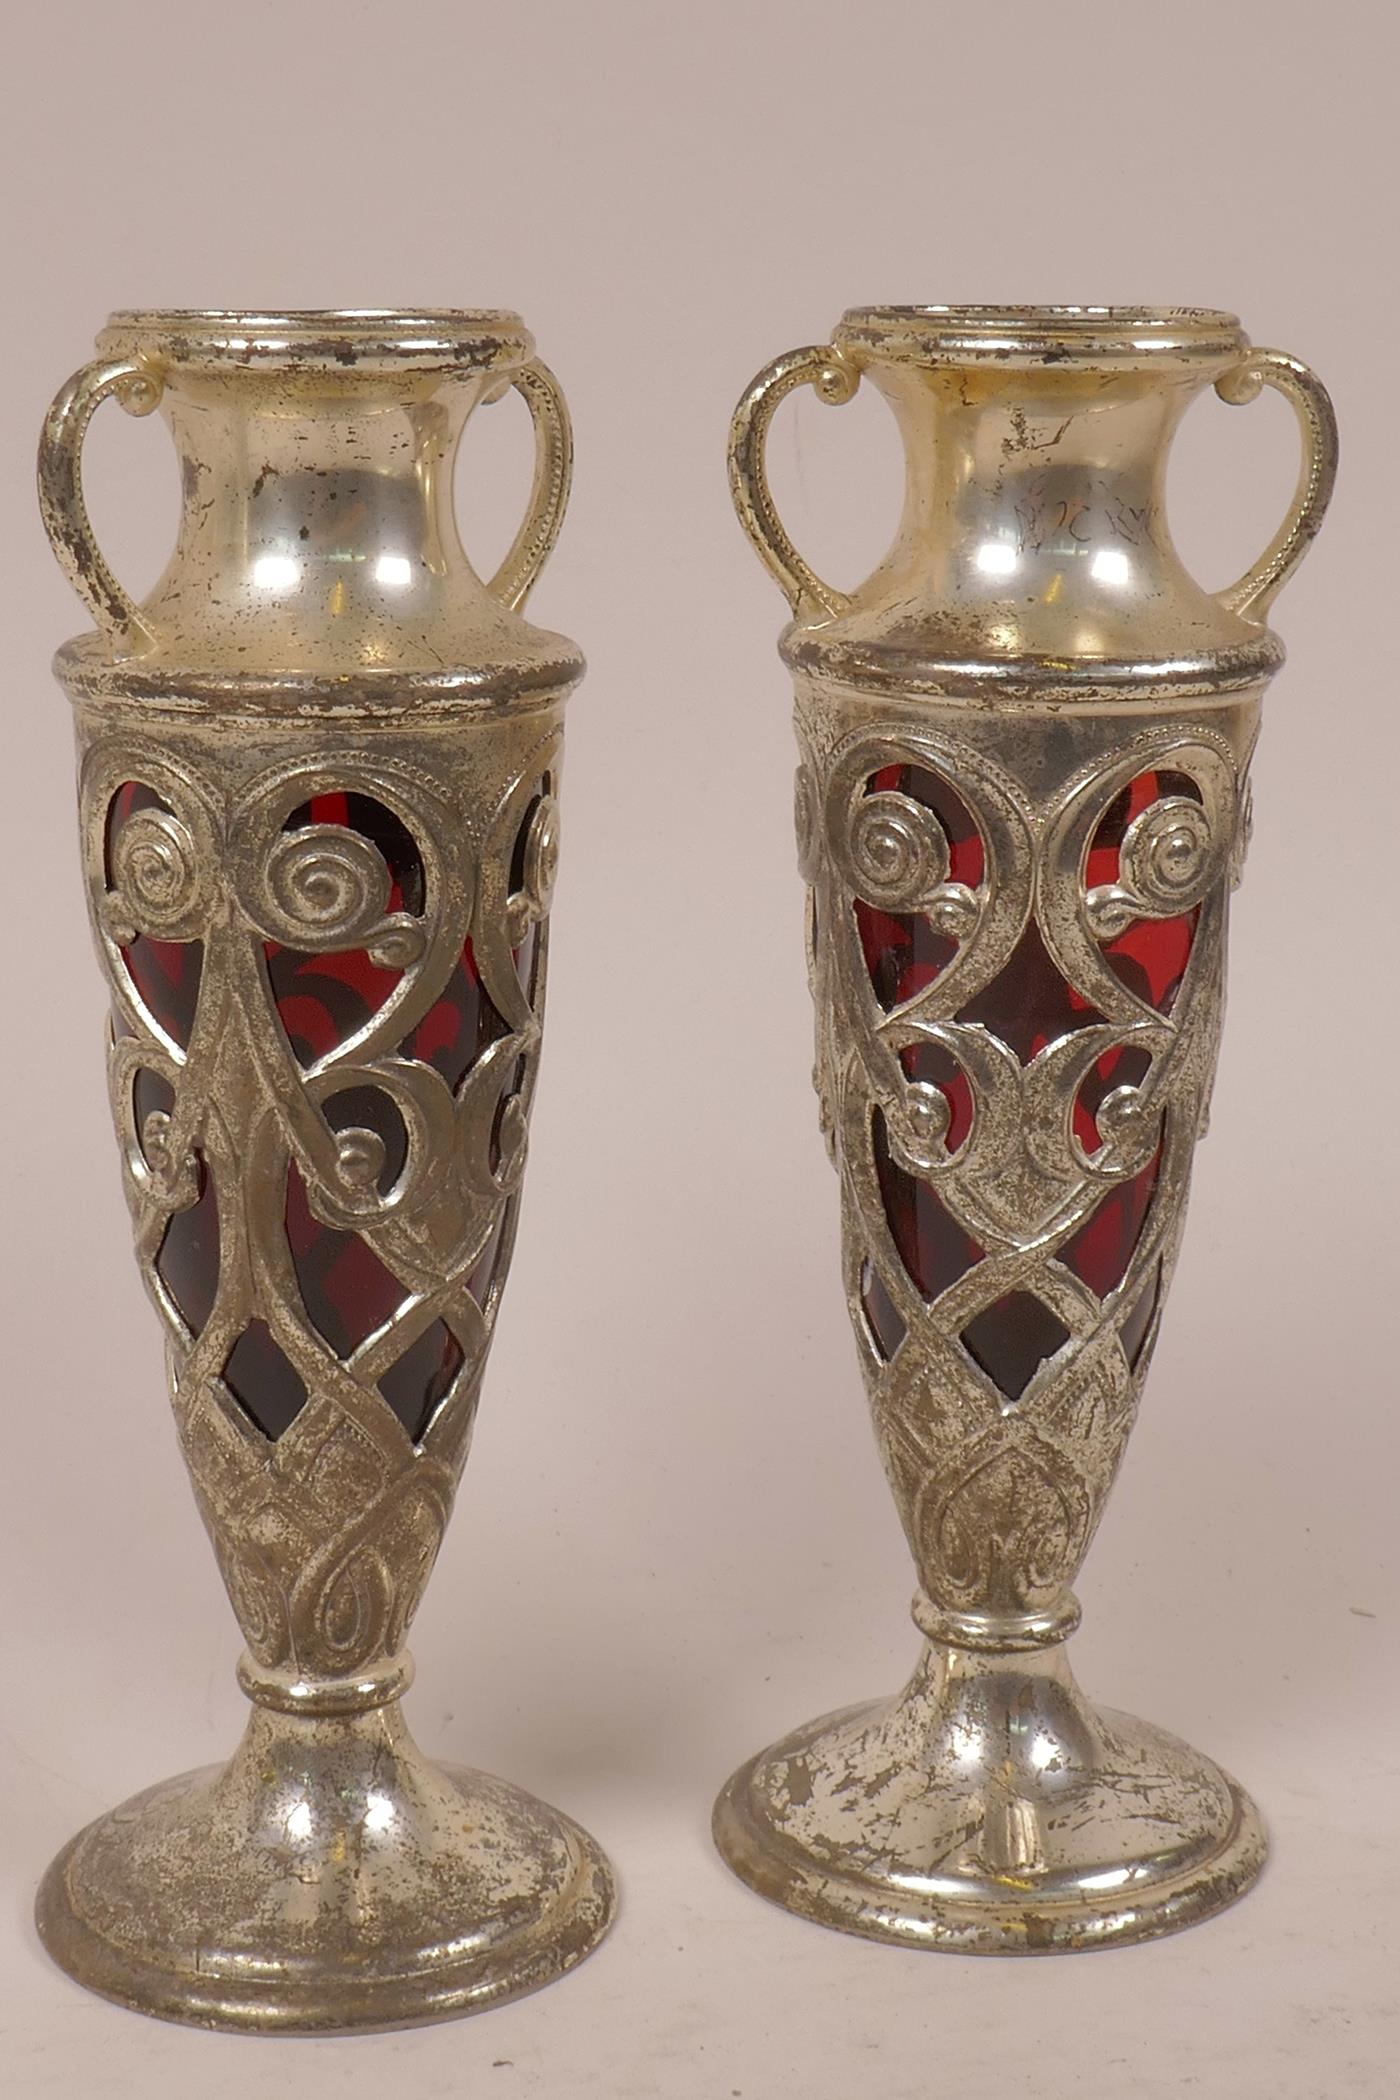 A pair of Japanese pierced plated antimony specimen vases with cranberry glass lines, 7" high - Image 2 of 2